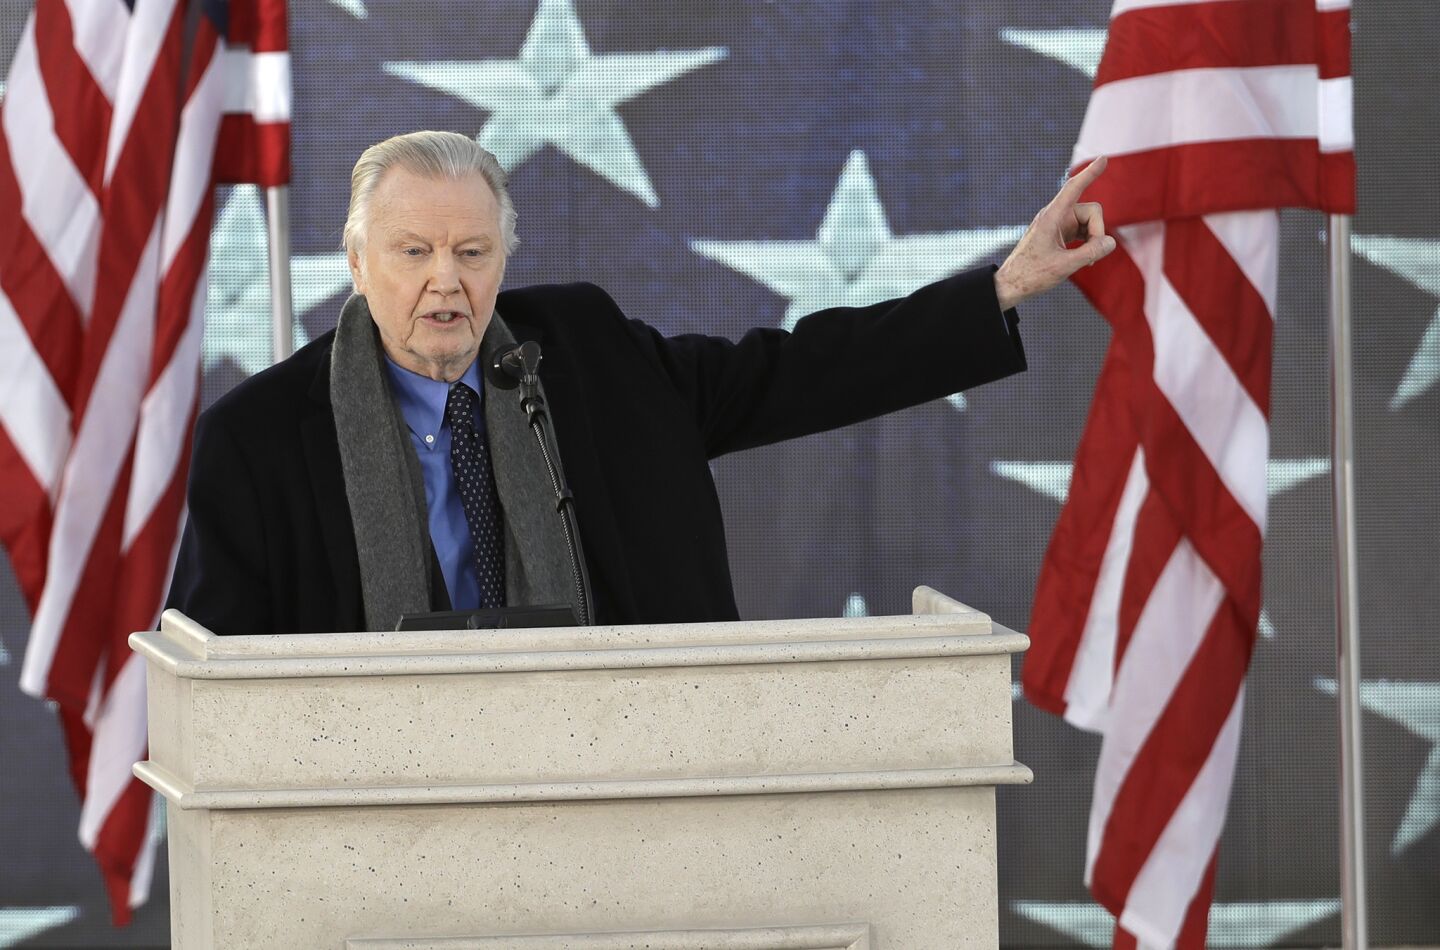 Jon Voight speaks during a pre-Inaugural "Make America Great Again! Welcome Celebration" at the Lincoln Memorial on Thursday.